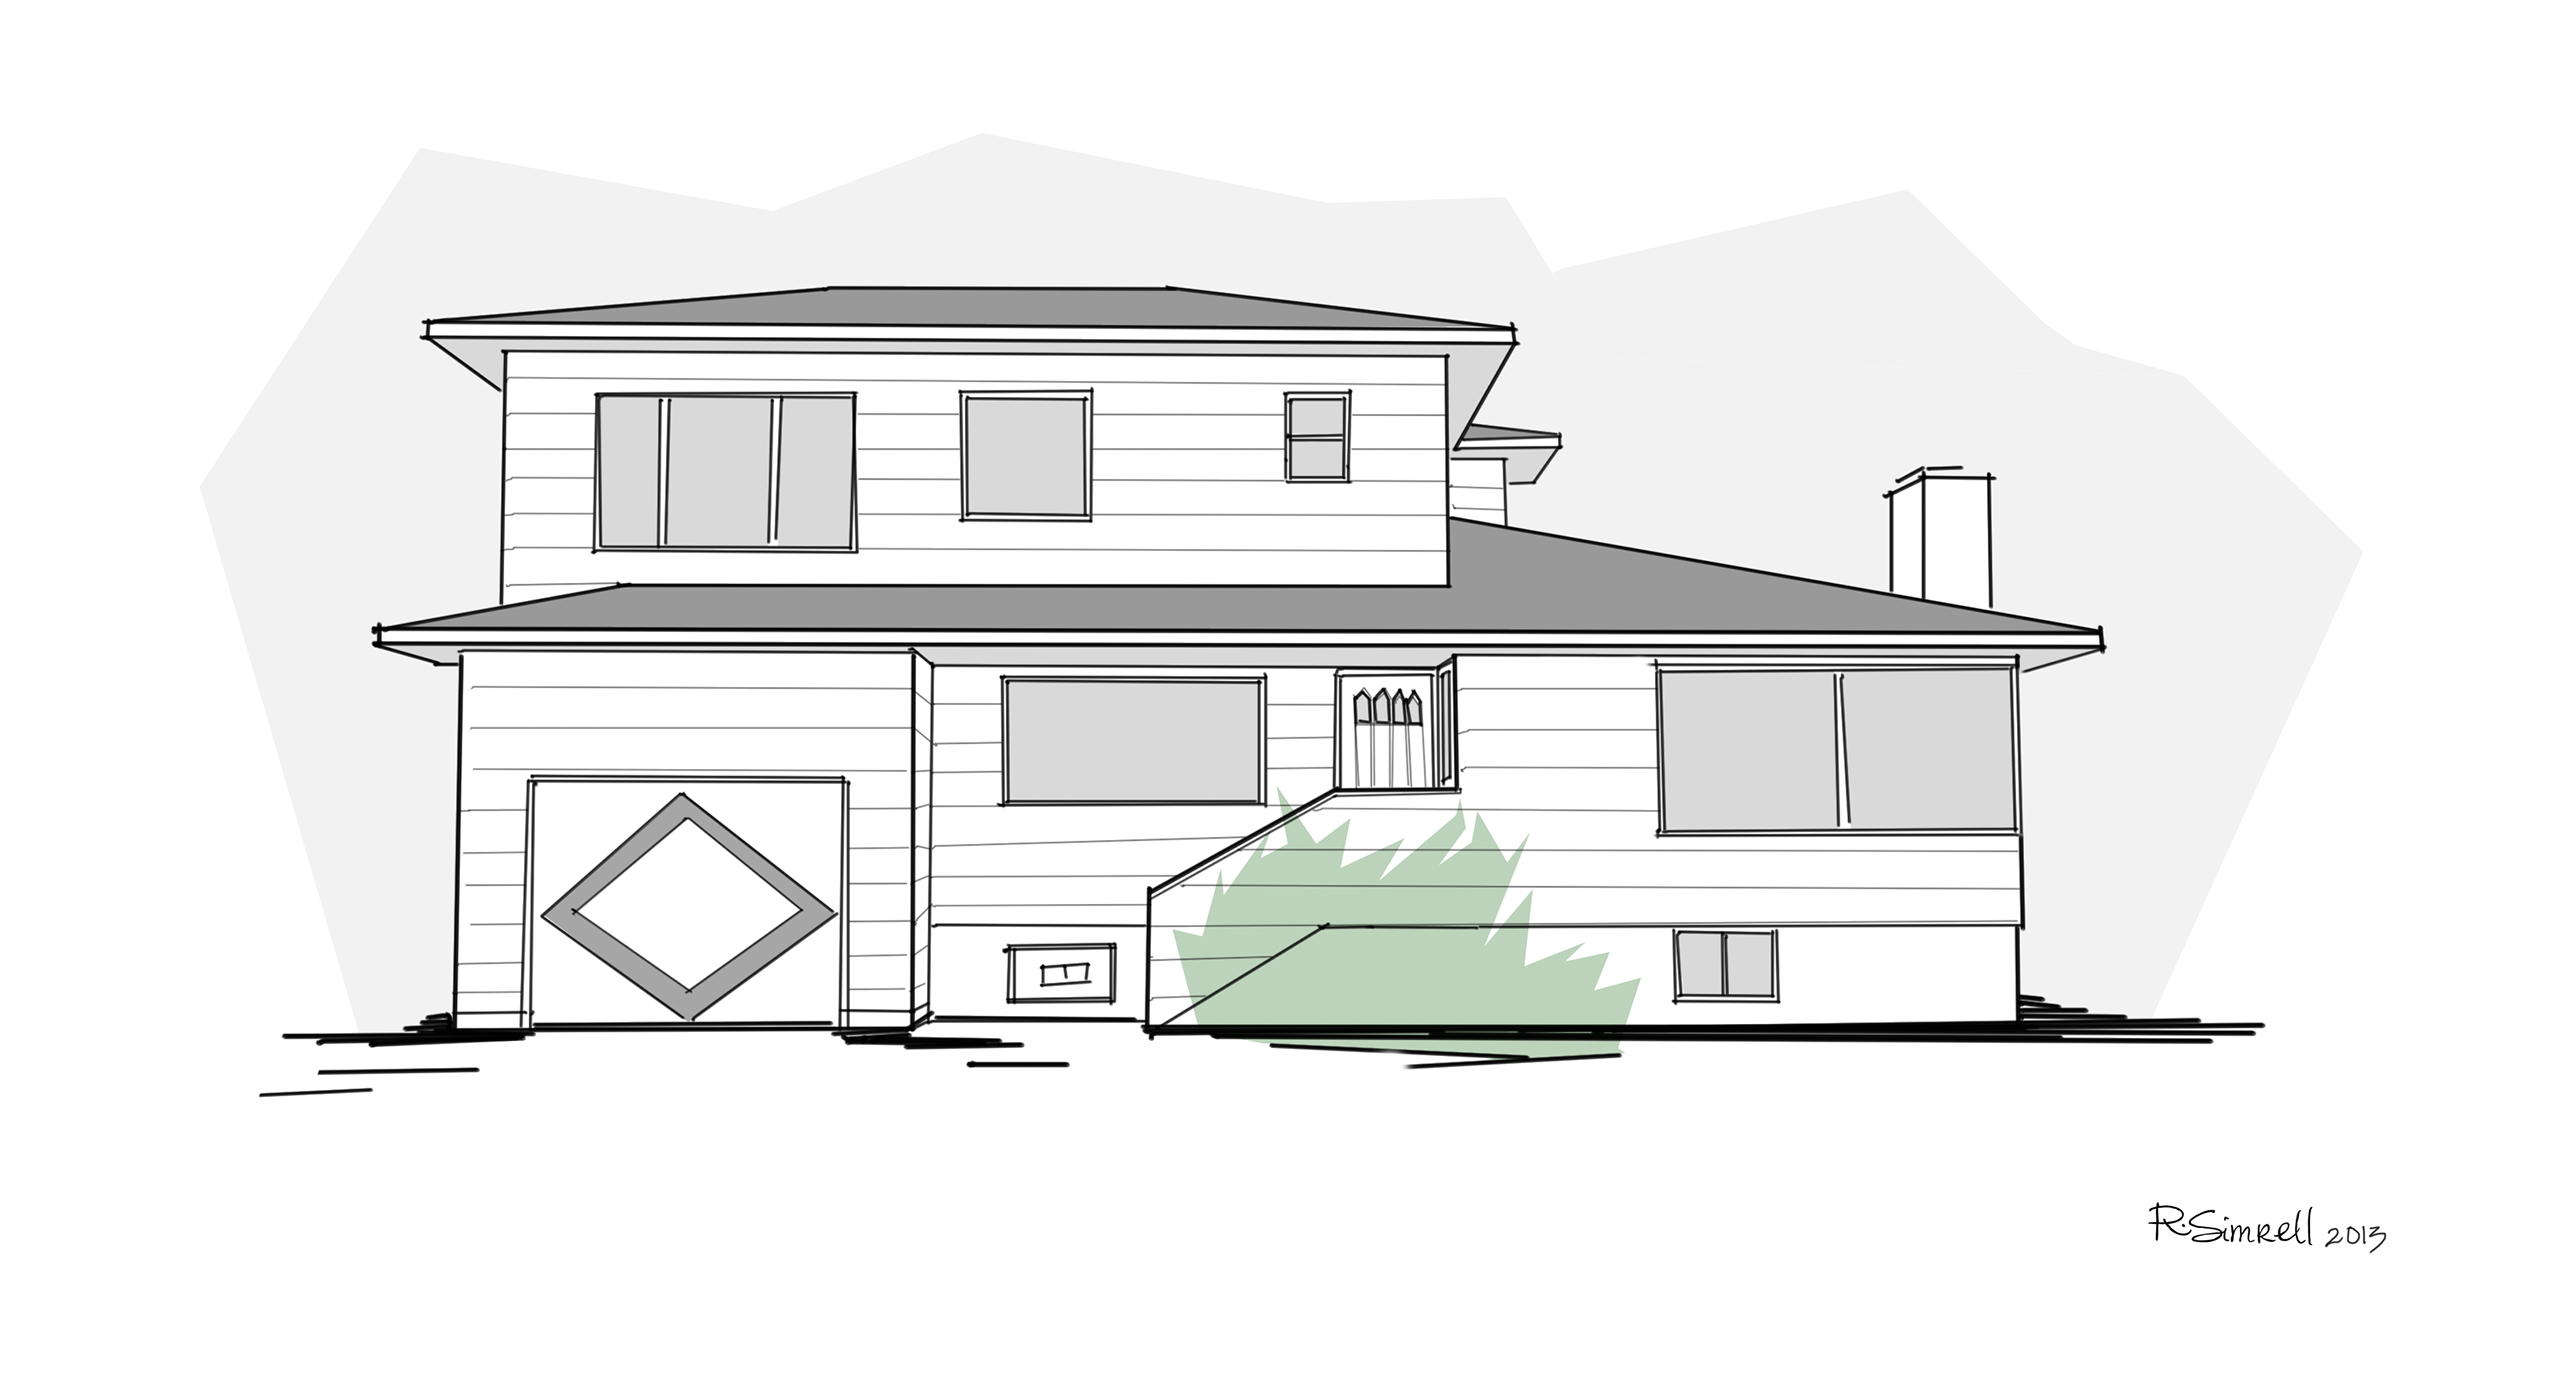 92nd Street Remodel & Addition: Early Design Sketches - Existing Conditions